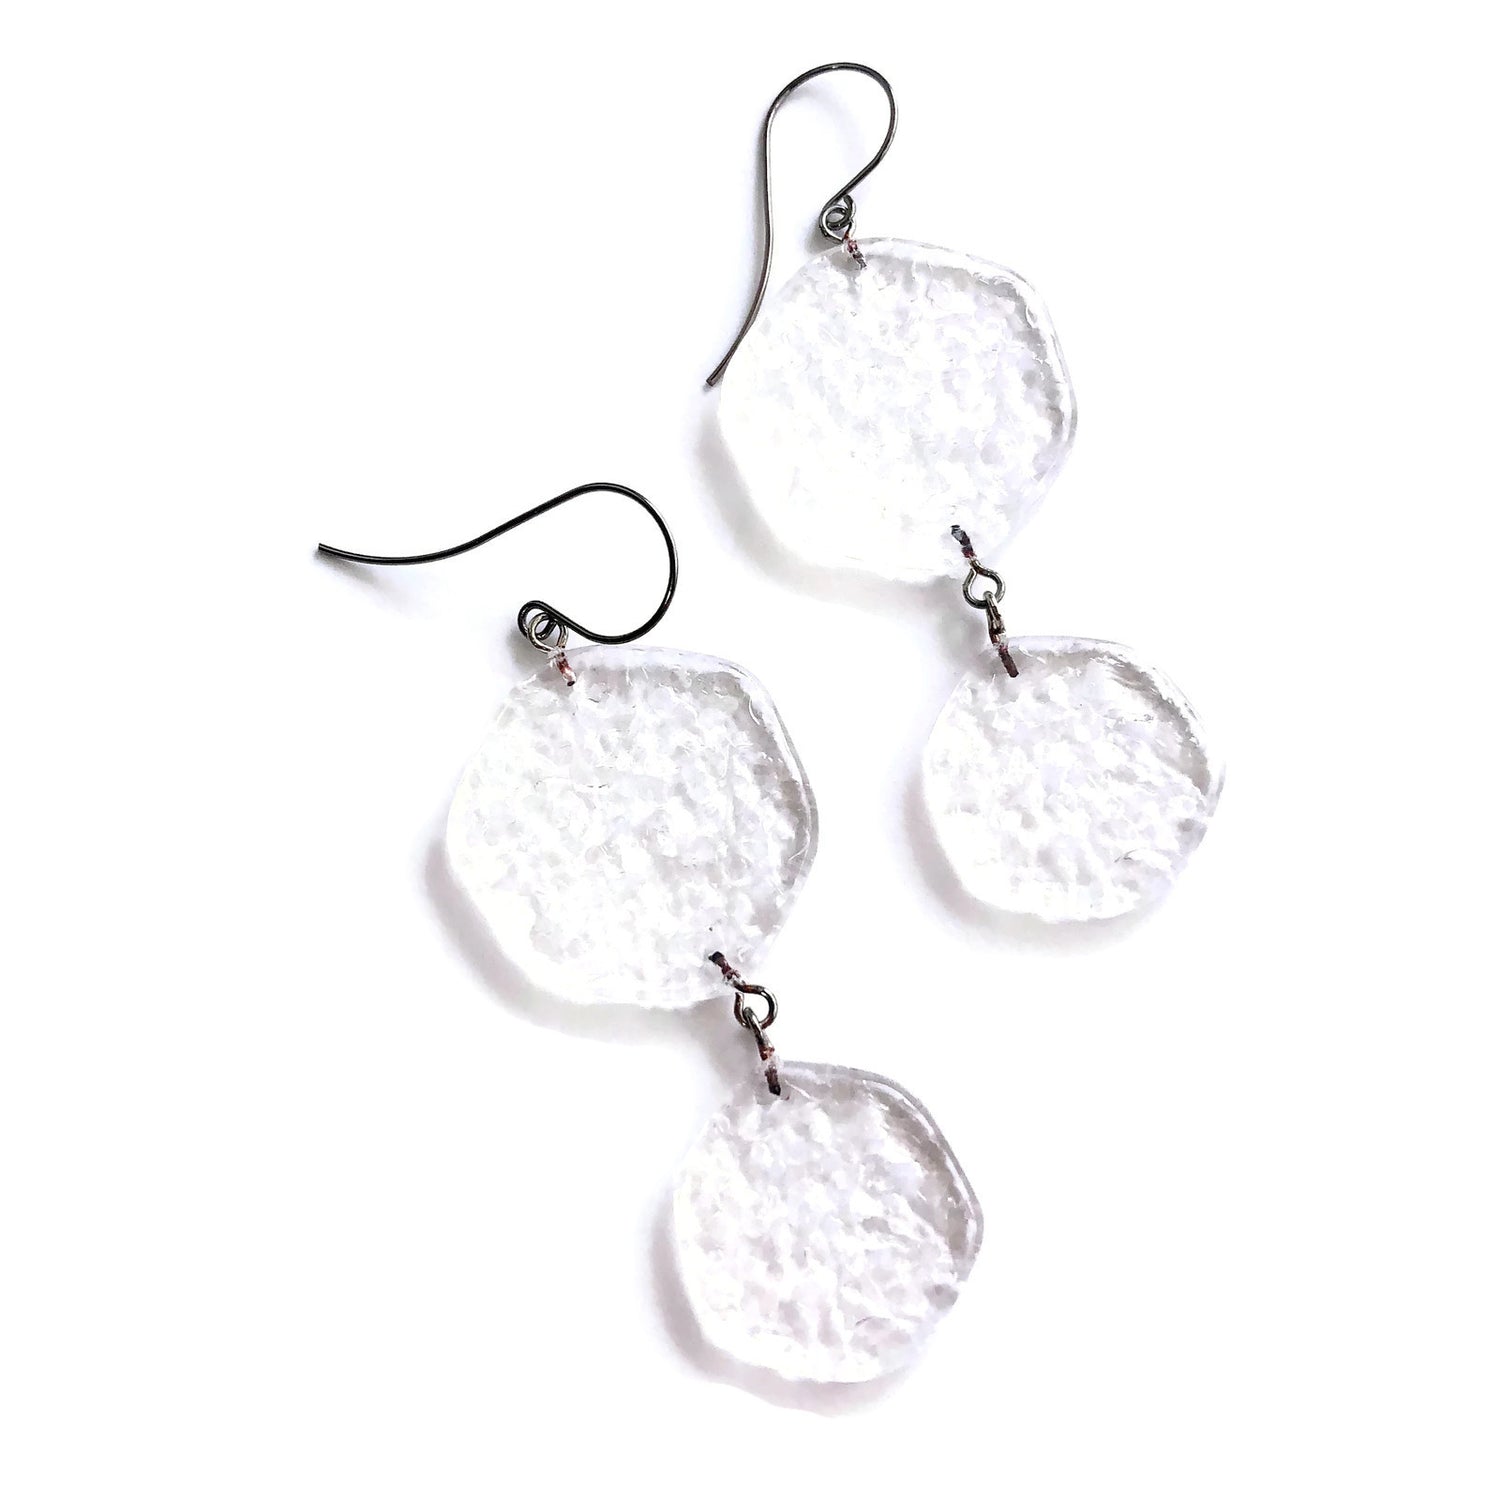 textured lucite earrings